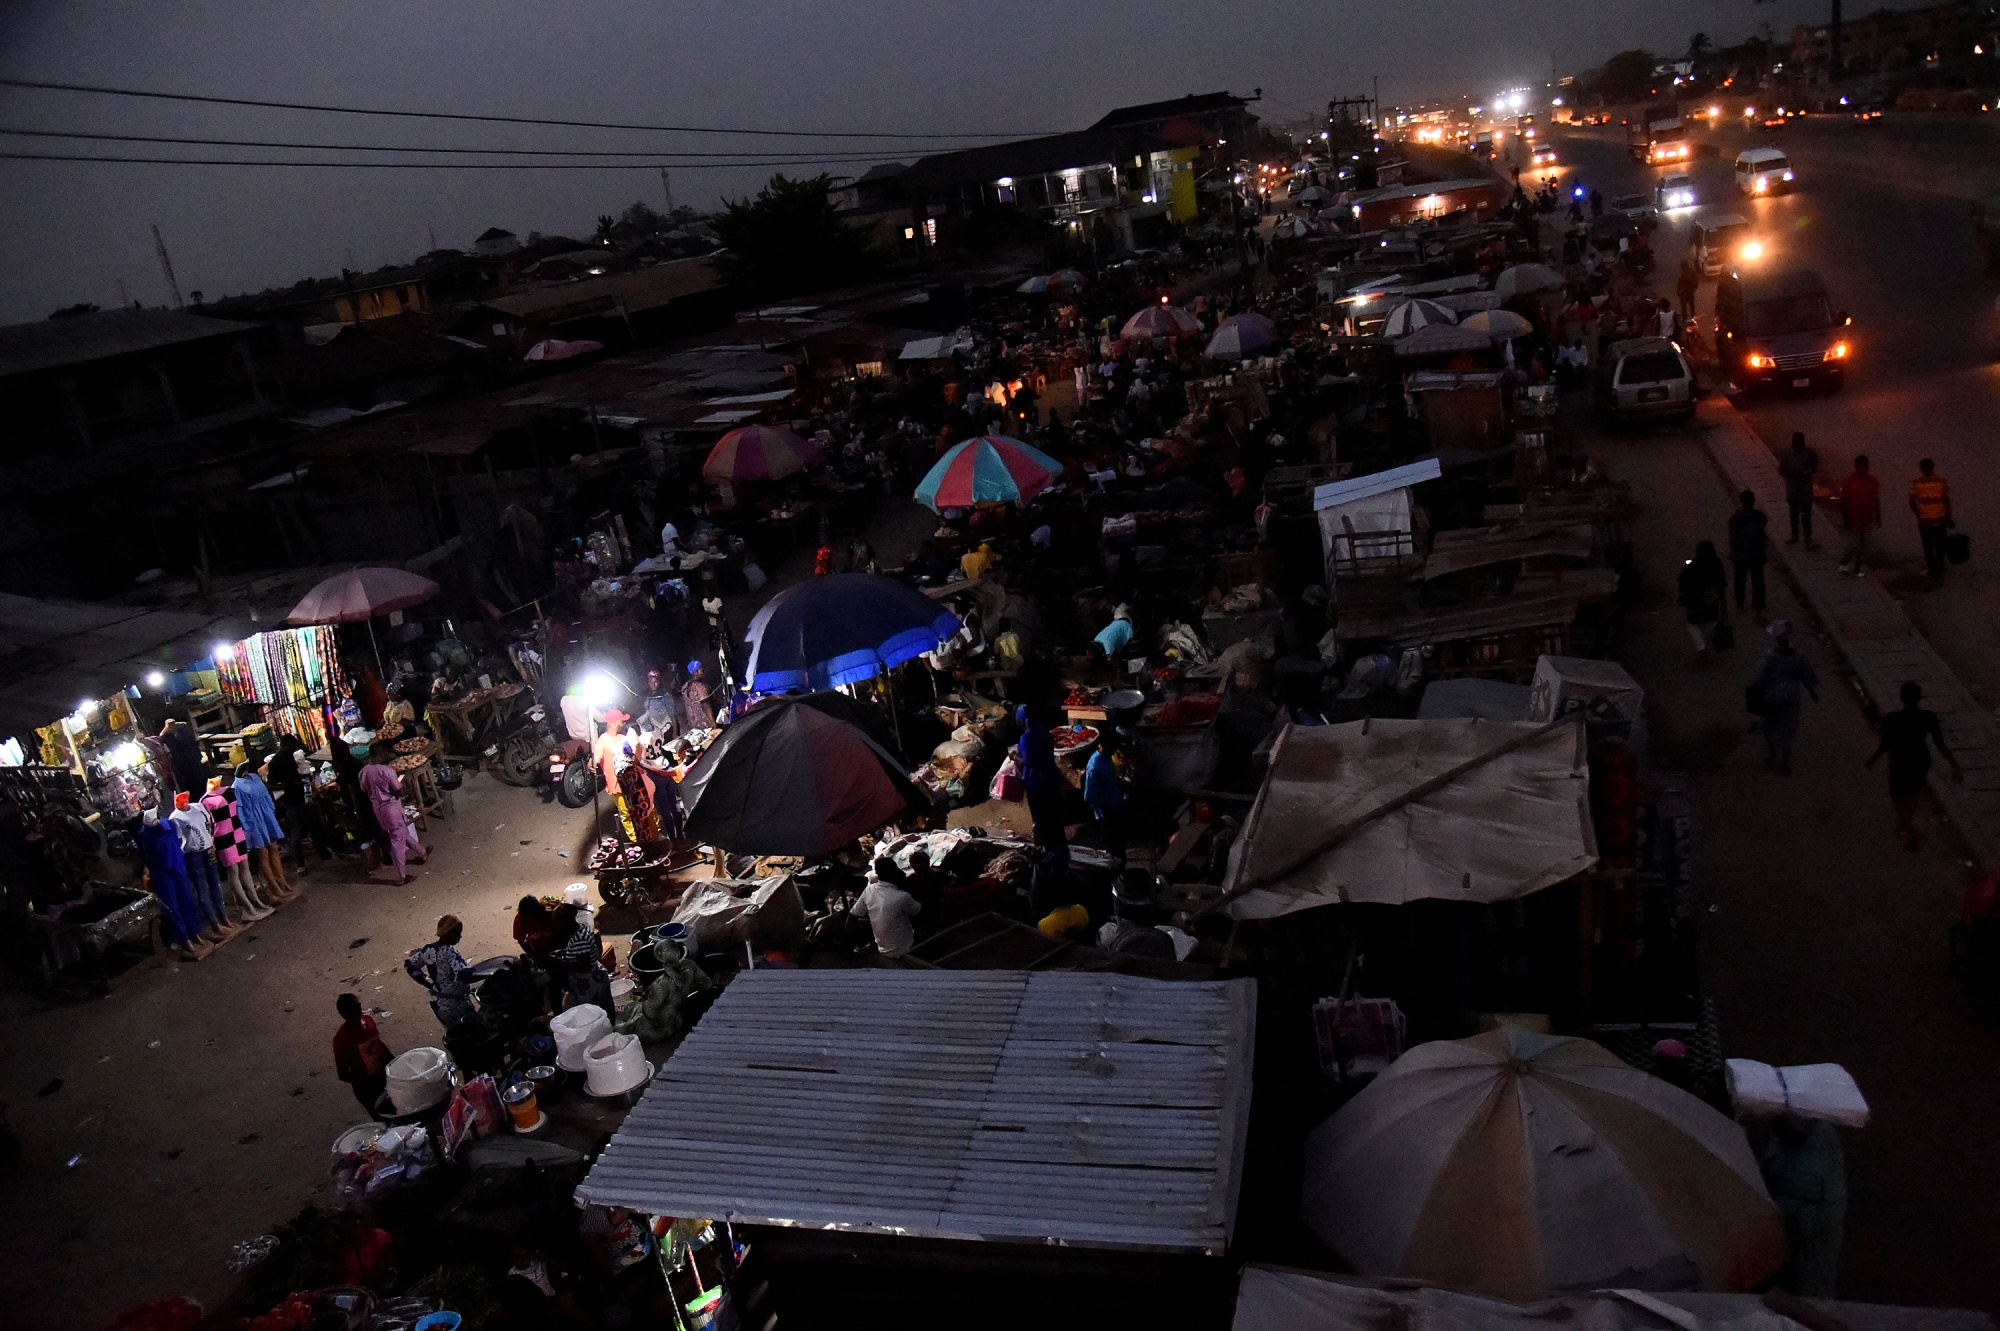 A market without electricity in&nbsp;Ibafo, Ogun State,&nbsp;Nigeria in March.